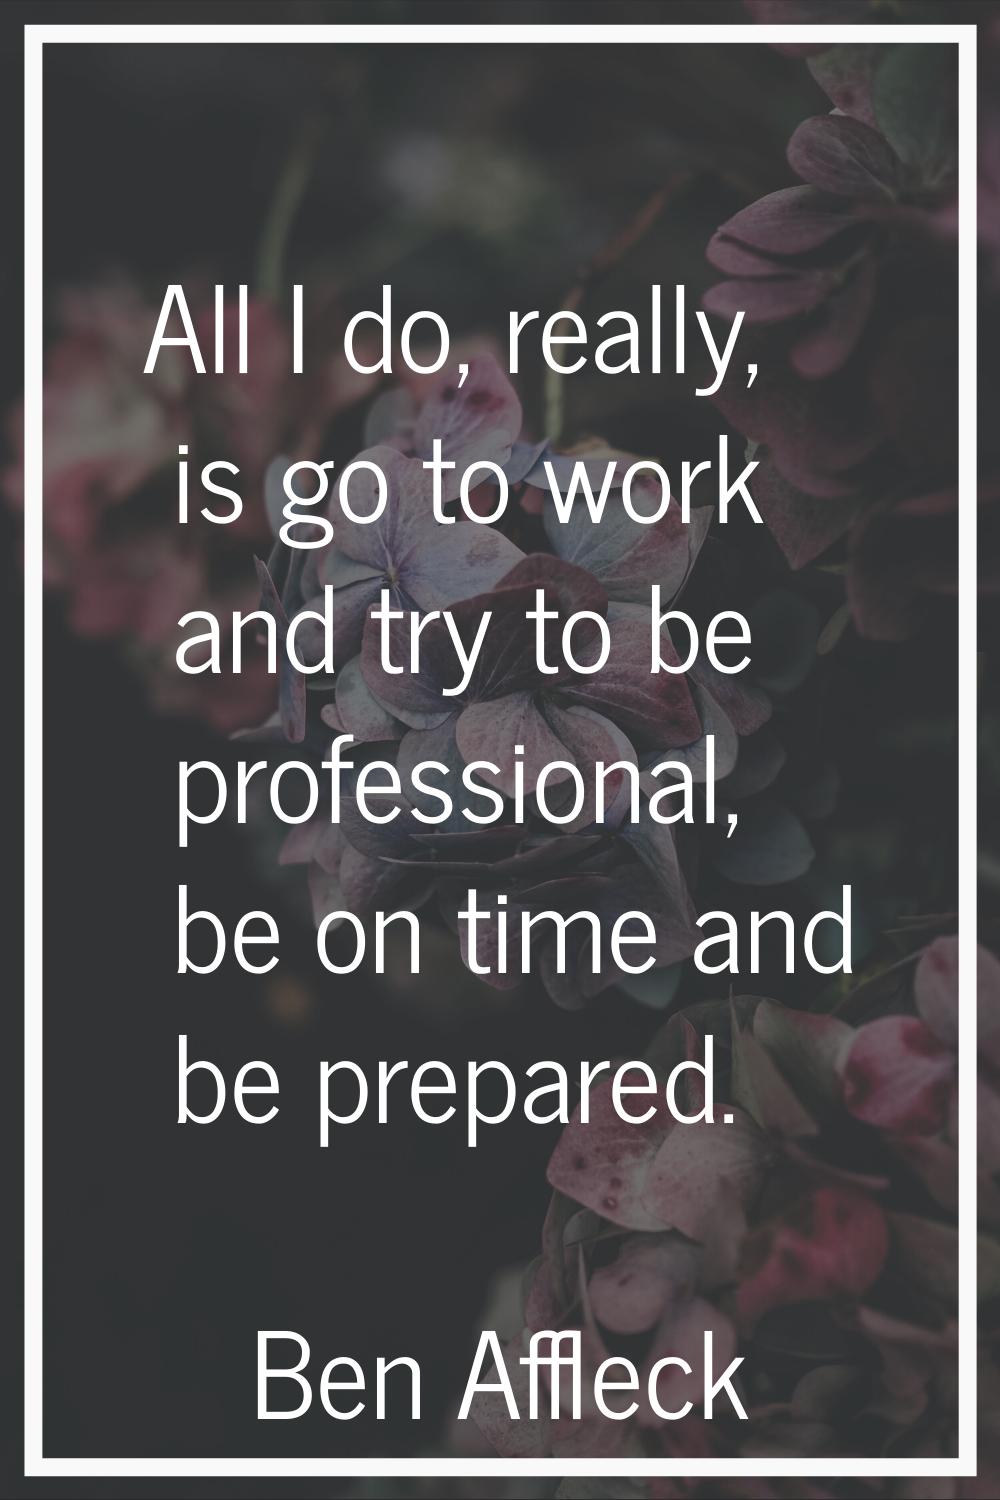 All I do, really, is go to work and try to be professional, be on time and be prepared.